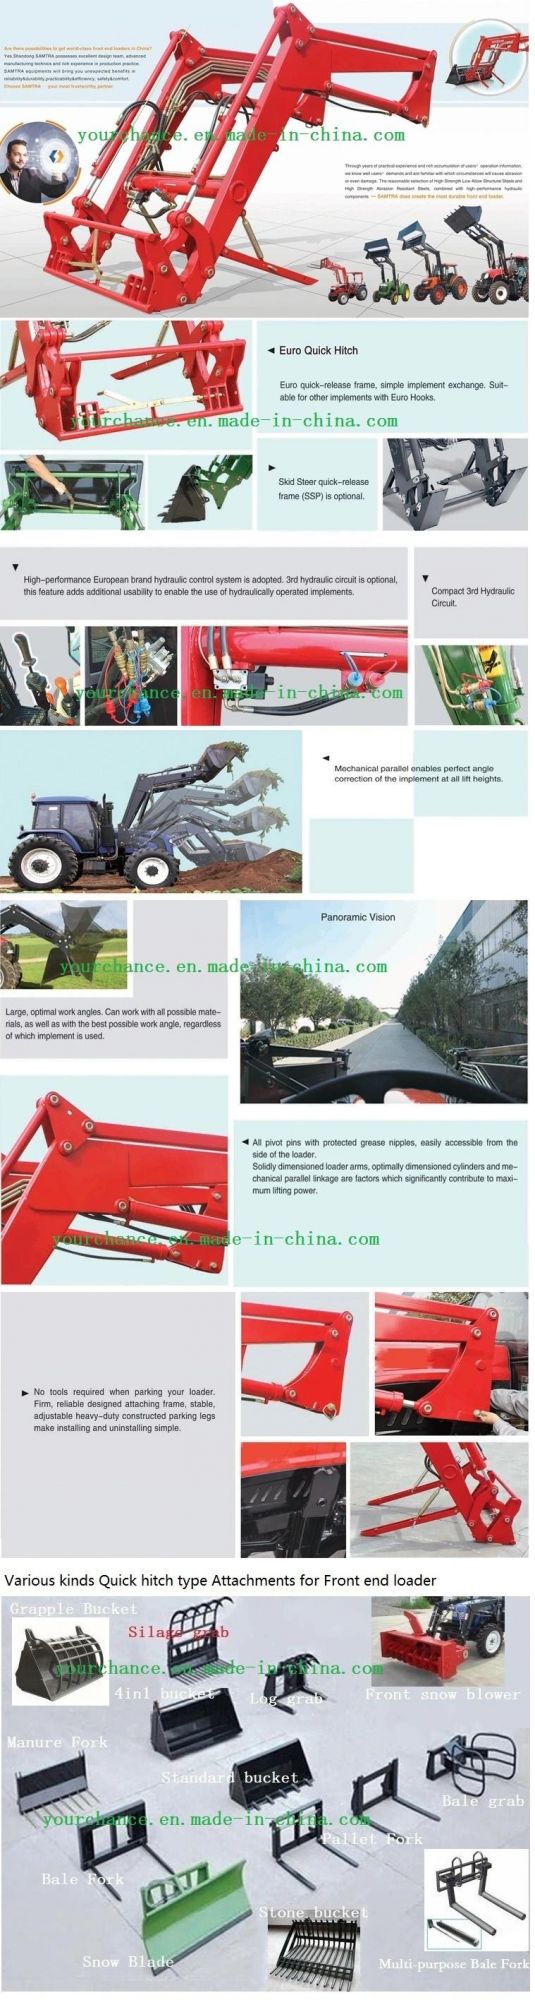 France Hot Sale Tz04D Front End Loader with Ce Certificate for 30-55HP Small Garden Tractor